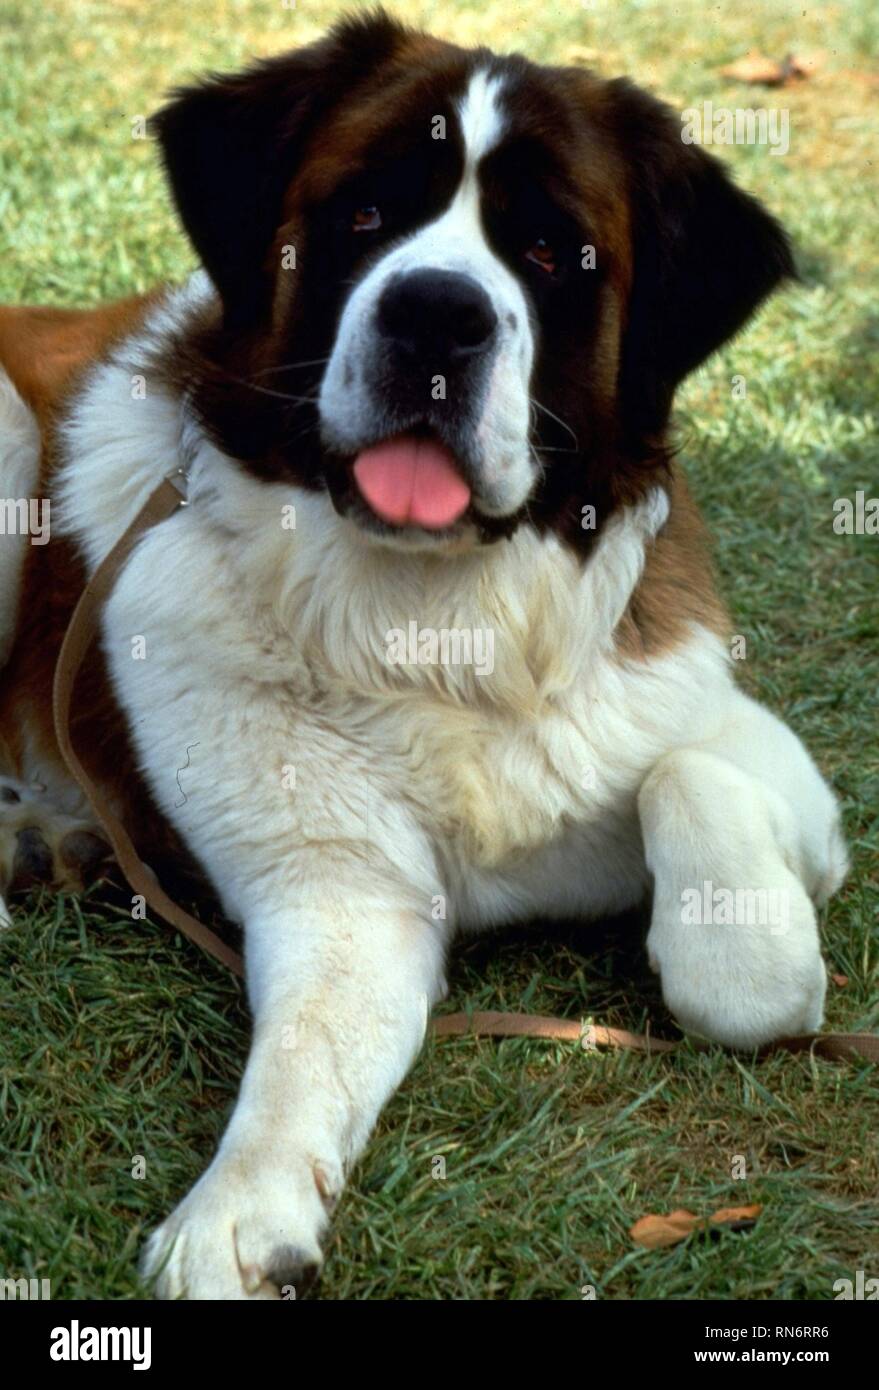 Beethoven Dog Film High Resolution Stock Photography and Images - Alamy